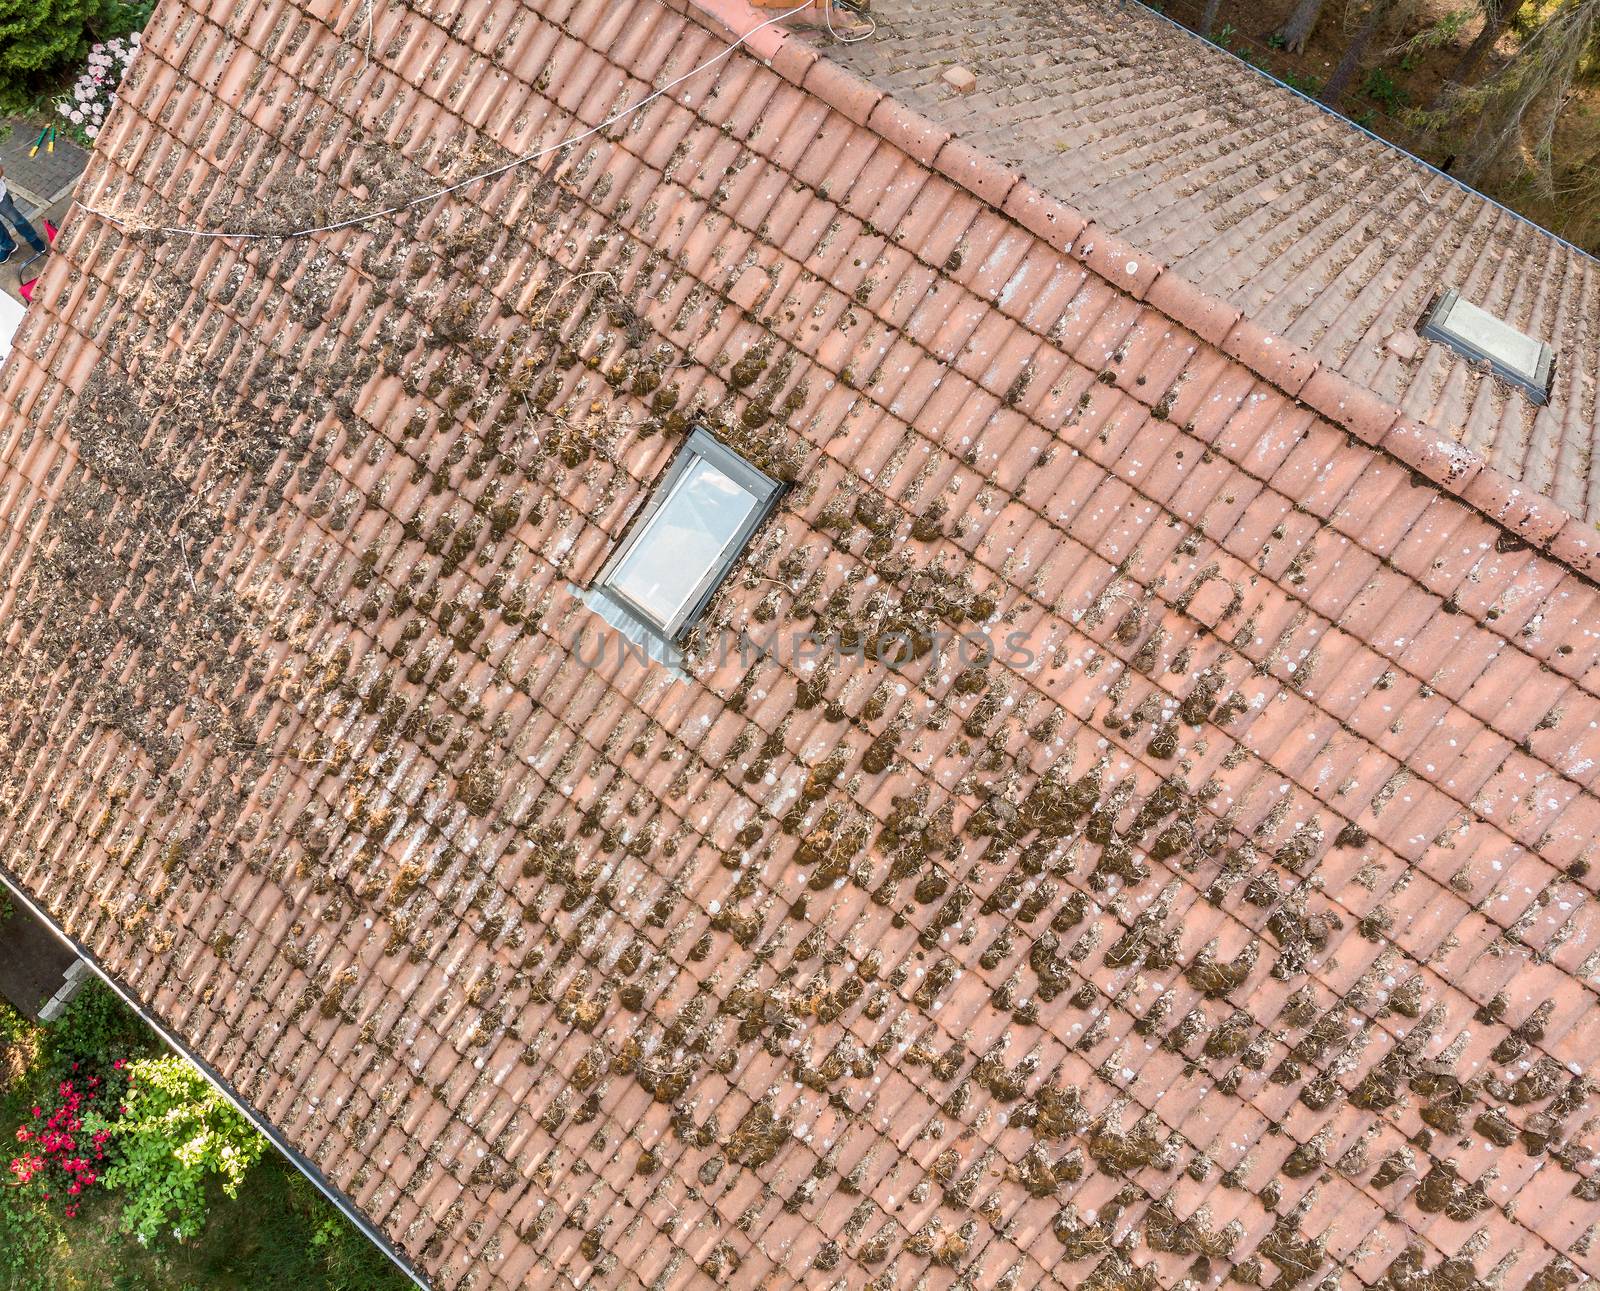 Overflight of the roof of a single-family house to check the condition of the roof tiles, aerial view made with drone